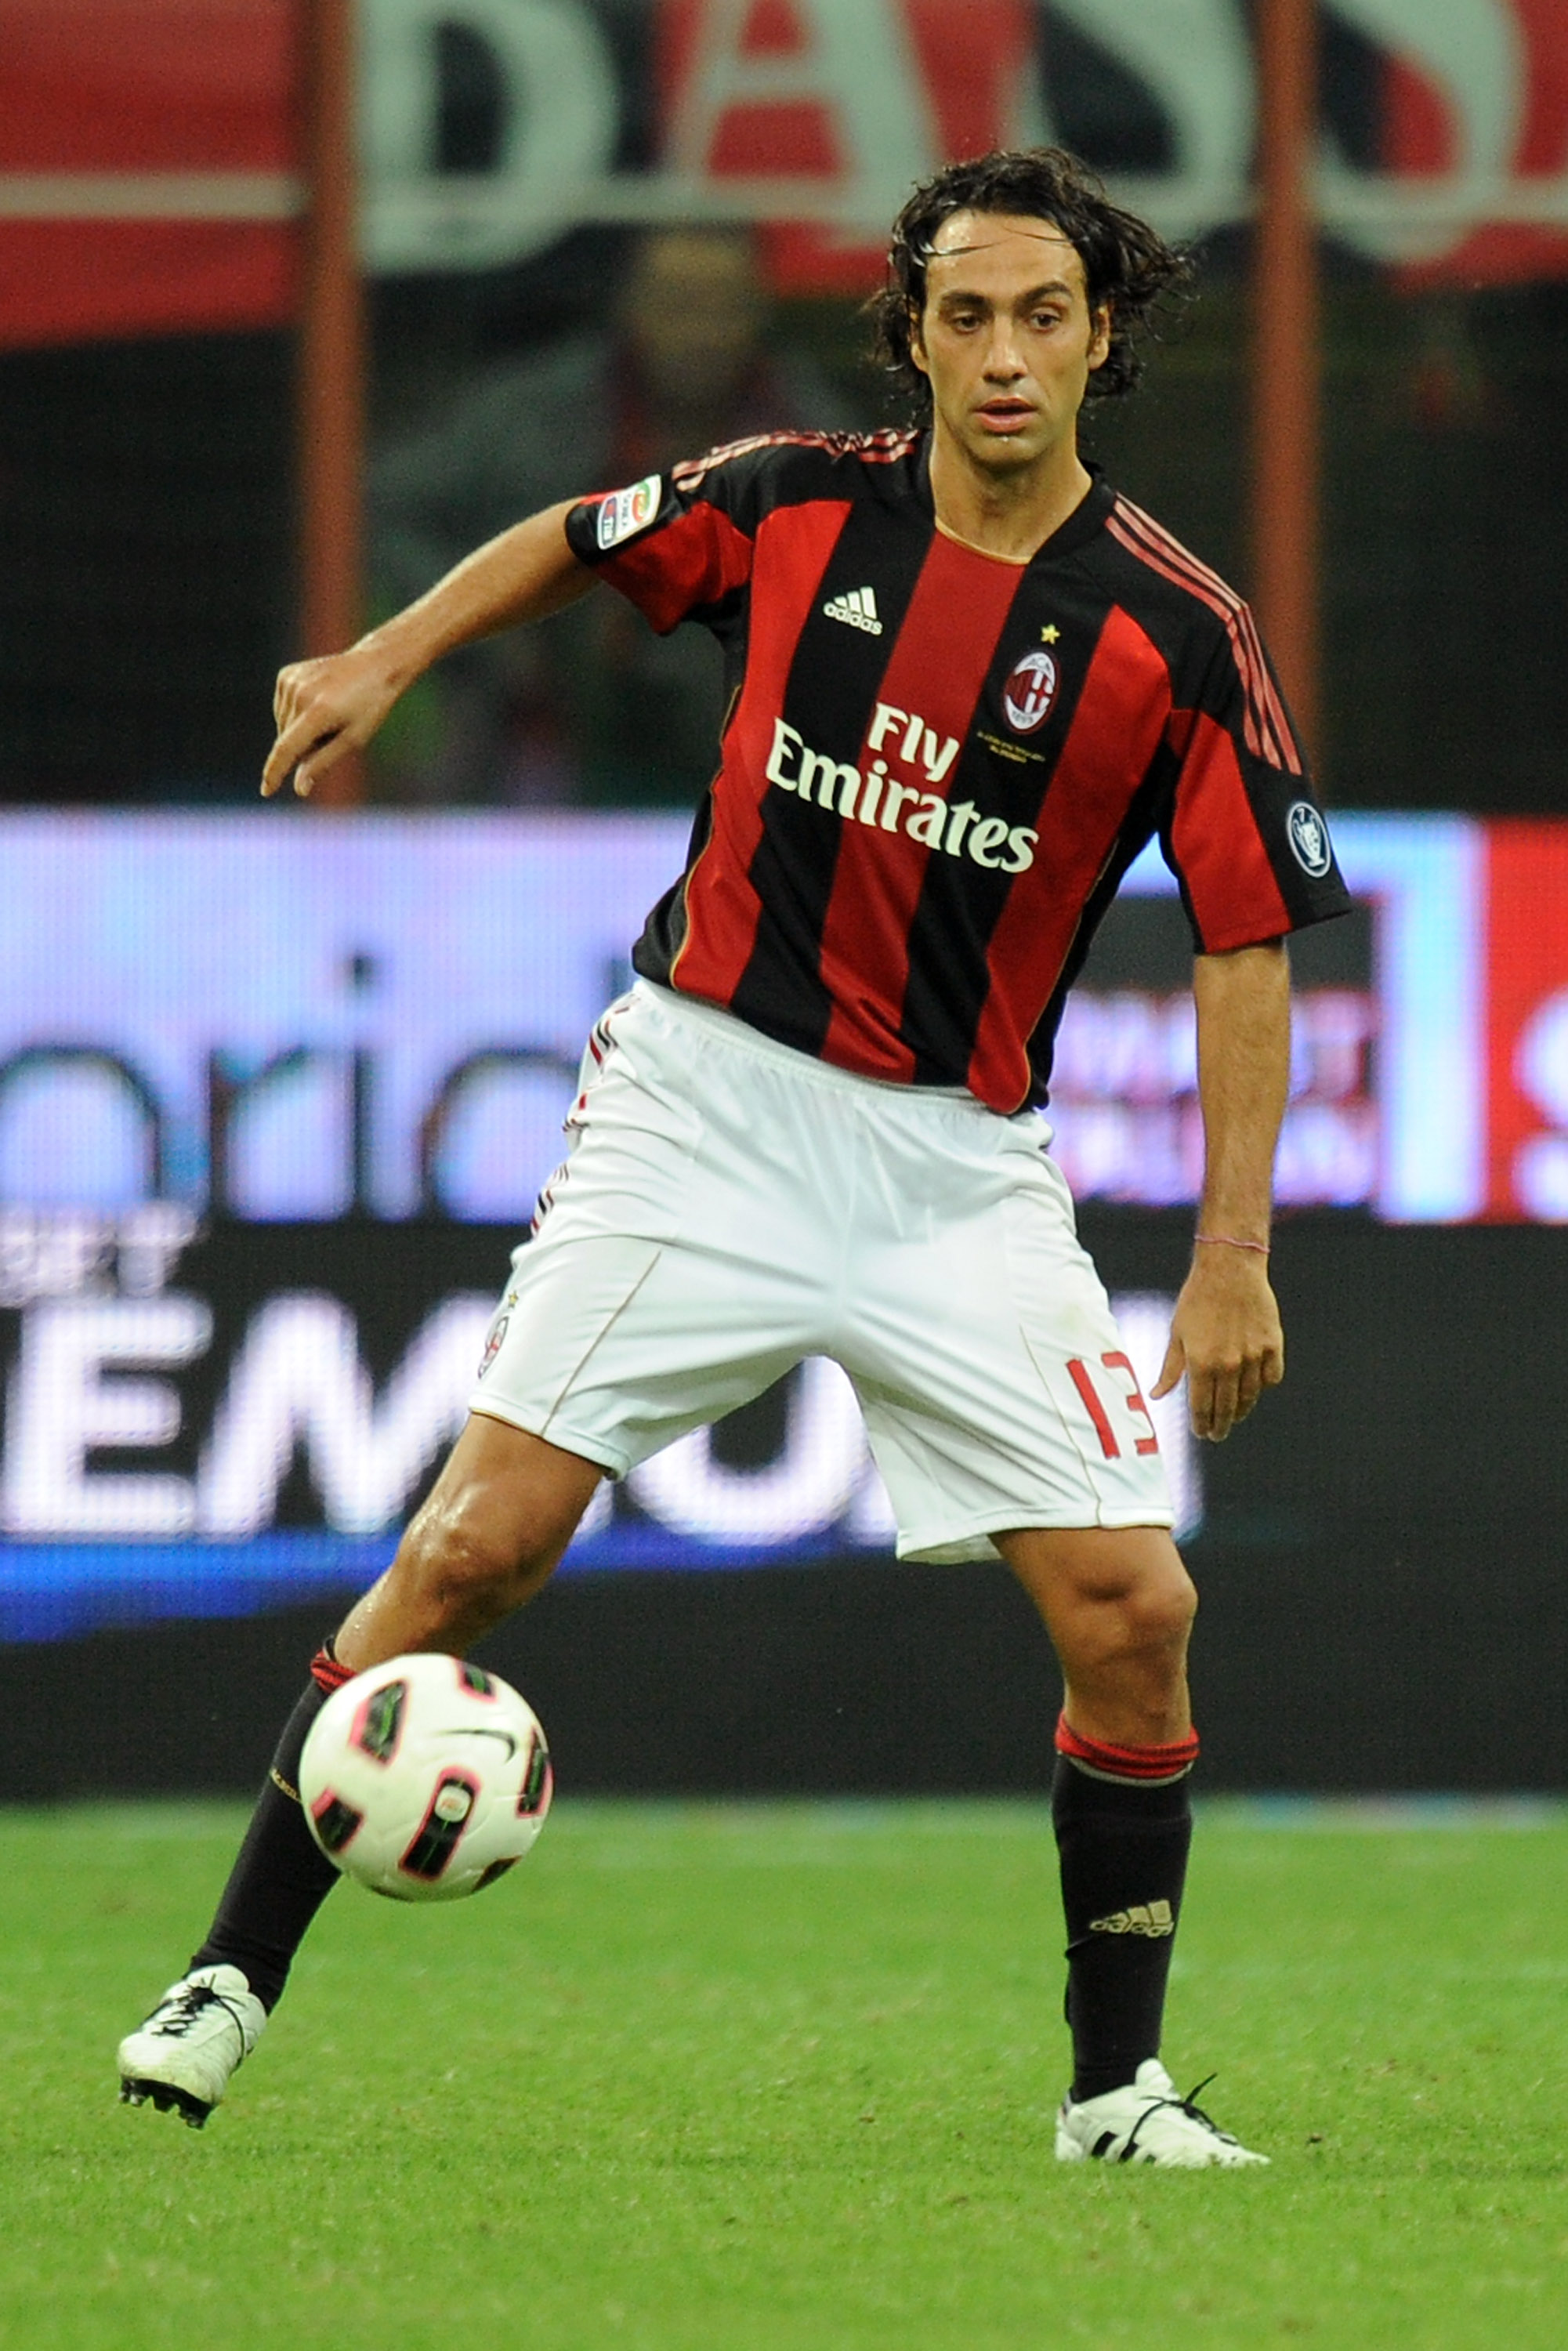 MILAN, ITALY - SEPTEMBER 26: Alessandro Nesta of Milan in action during the Serie A match between Milan and Genoa at Stadio Giuseppe Meazza on September 26, 2010 in Milan, Italy.  (Photo by Tullio M. Puglia/Getty Images)